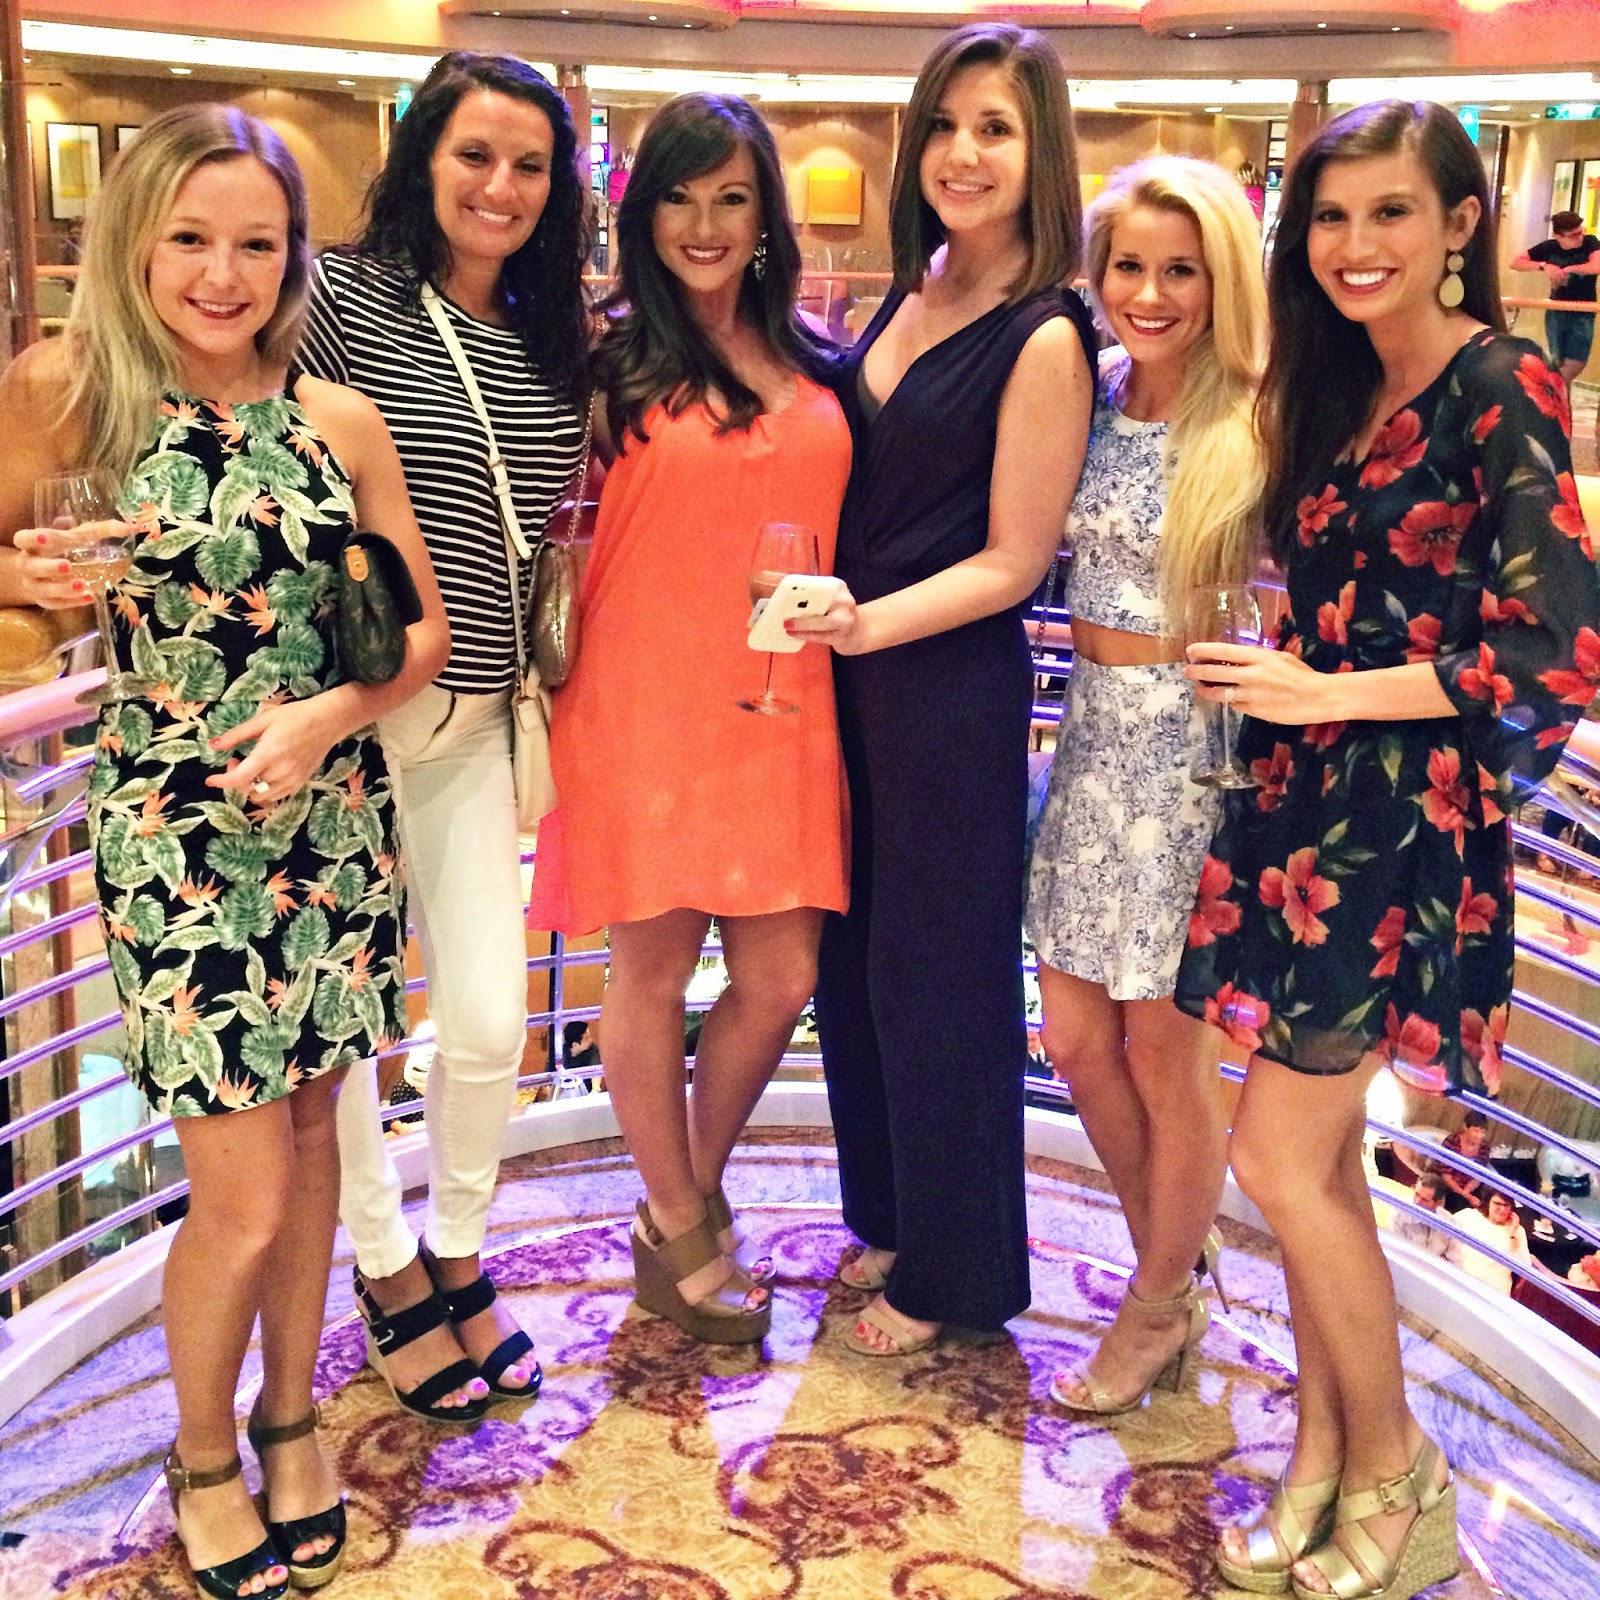 Bachelorette Cruise Re-cap! - Welcome to Olivia Rink